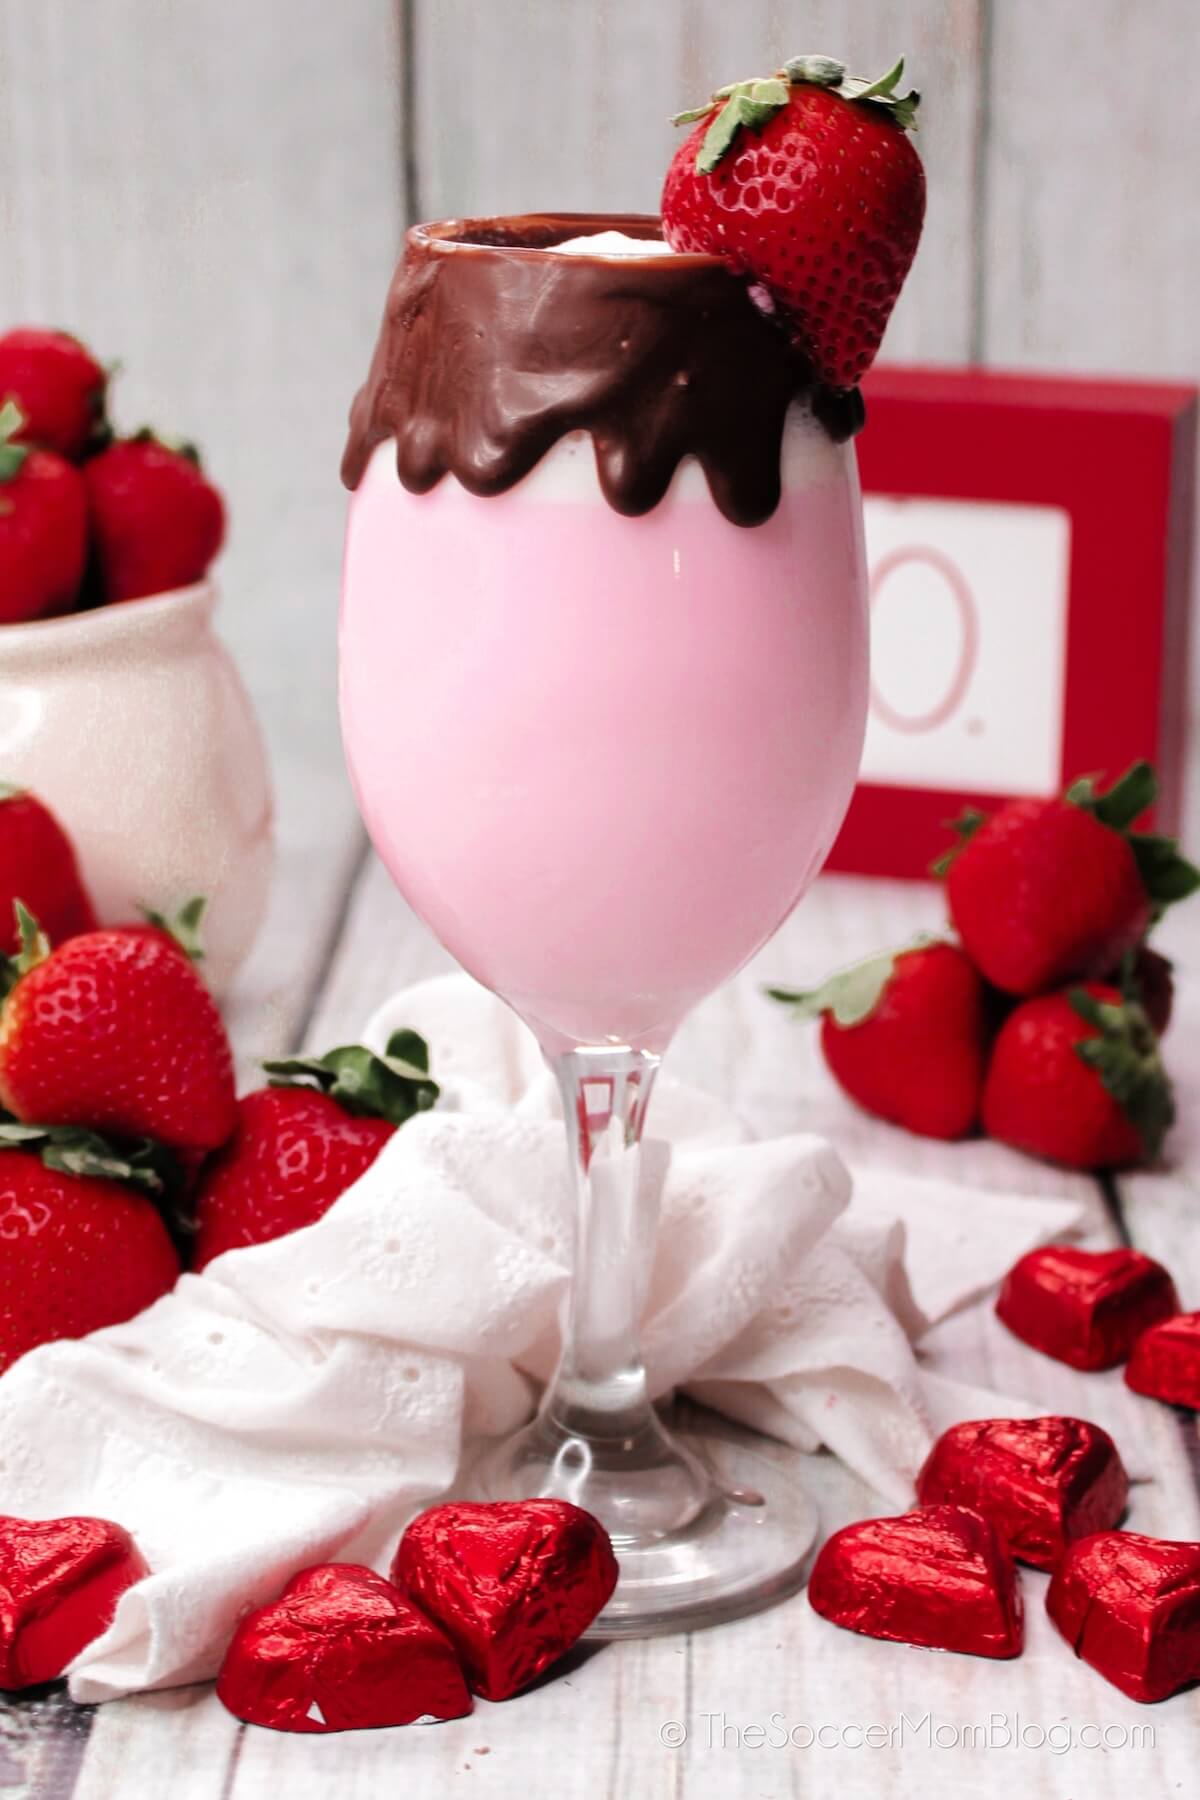 strawberries and cream cocktail in a chocolate coated glass